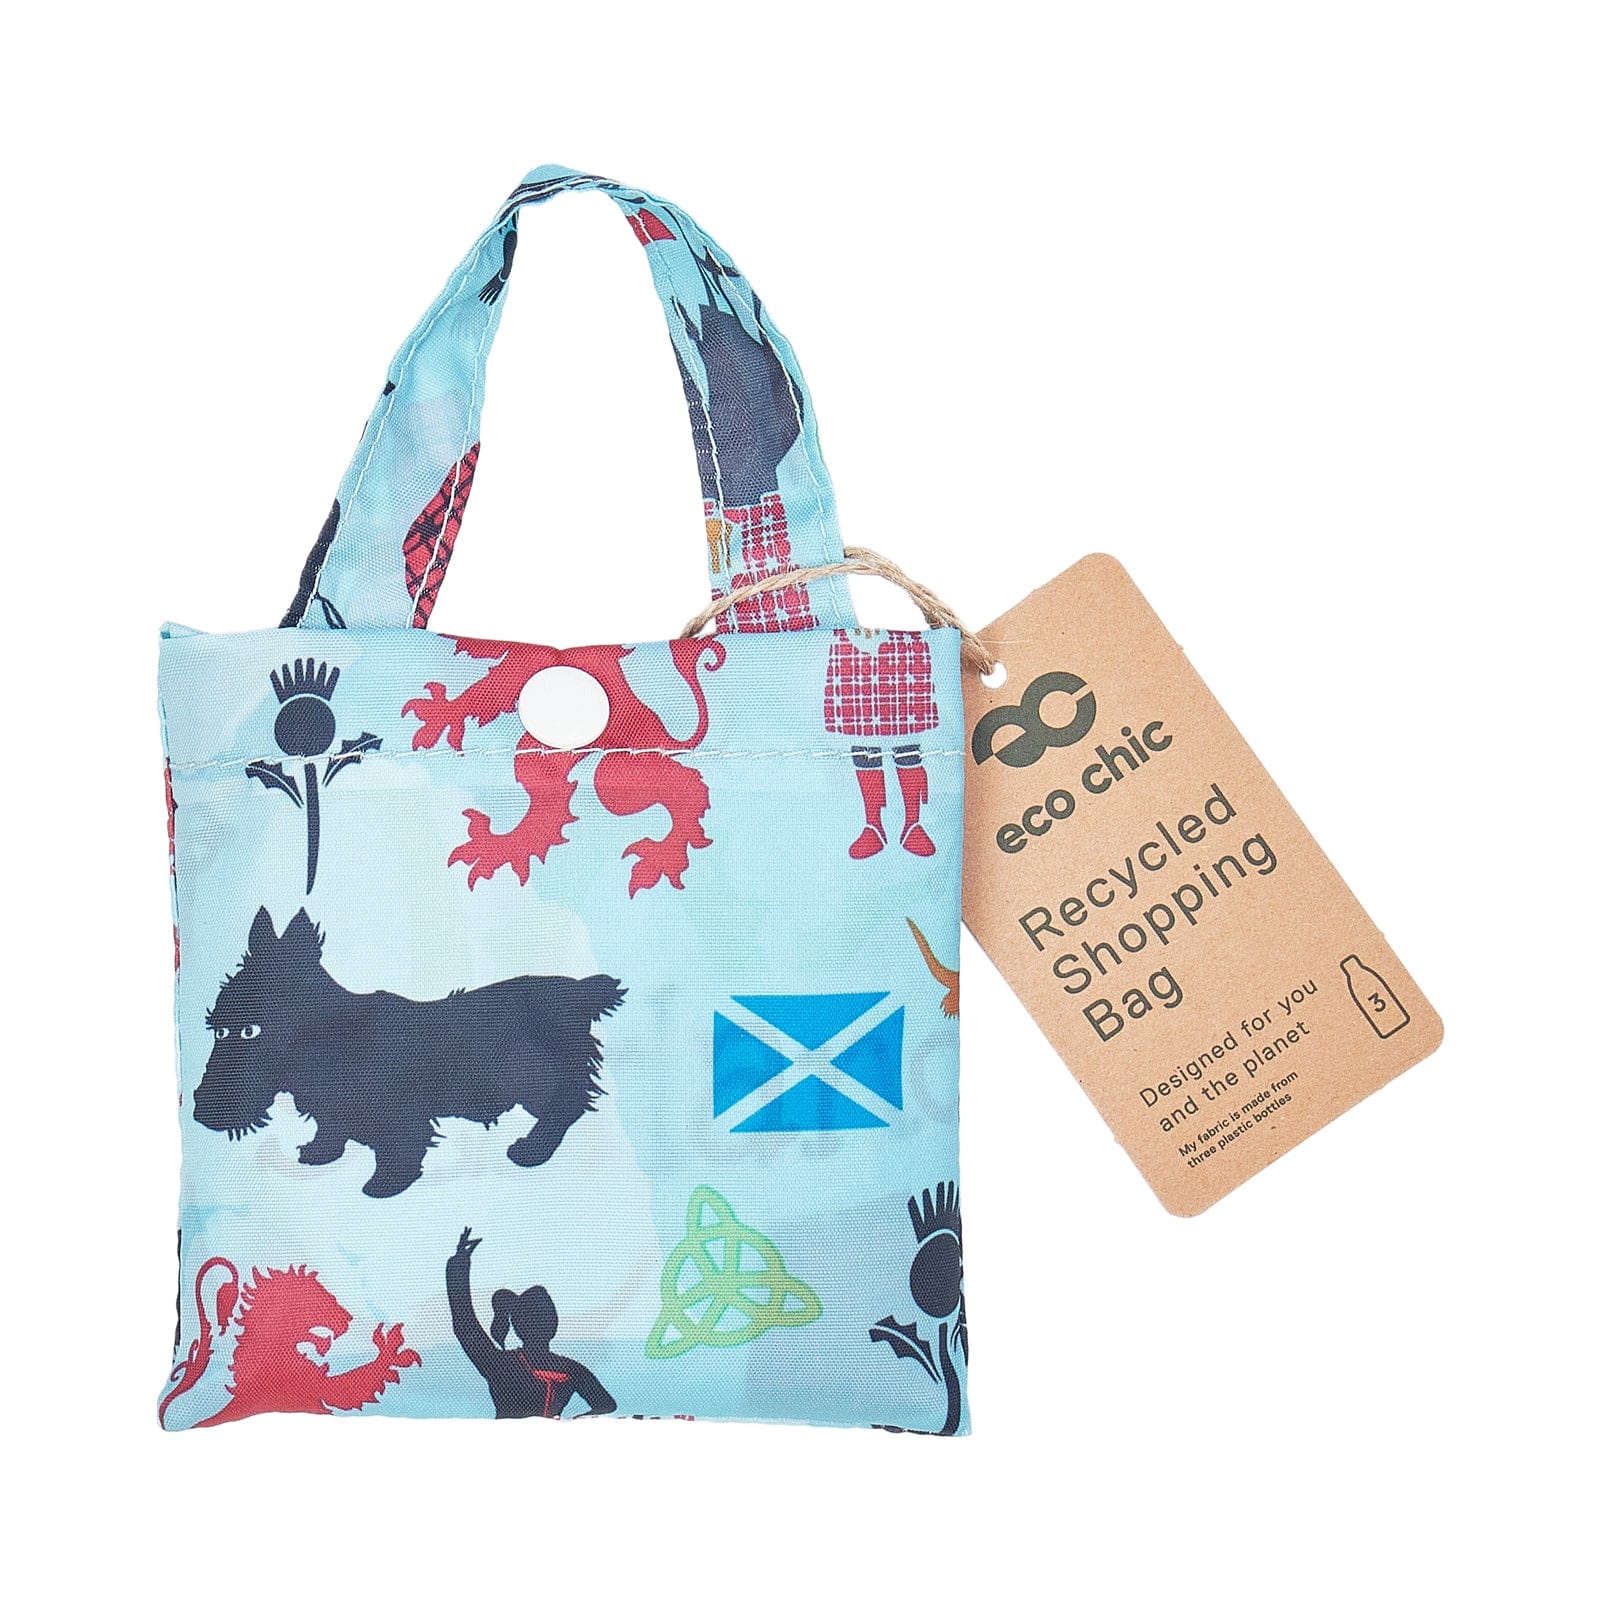 Eco Chic Blue Eco Chic Lightweight Foldable Reusable Shopping Bag Scottish Montage